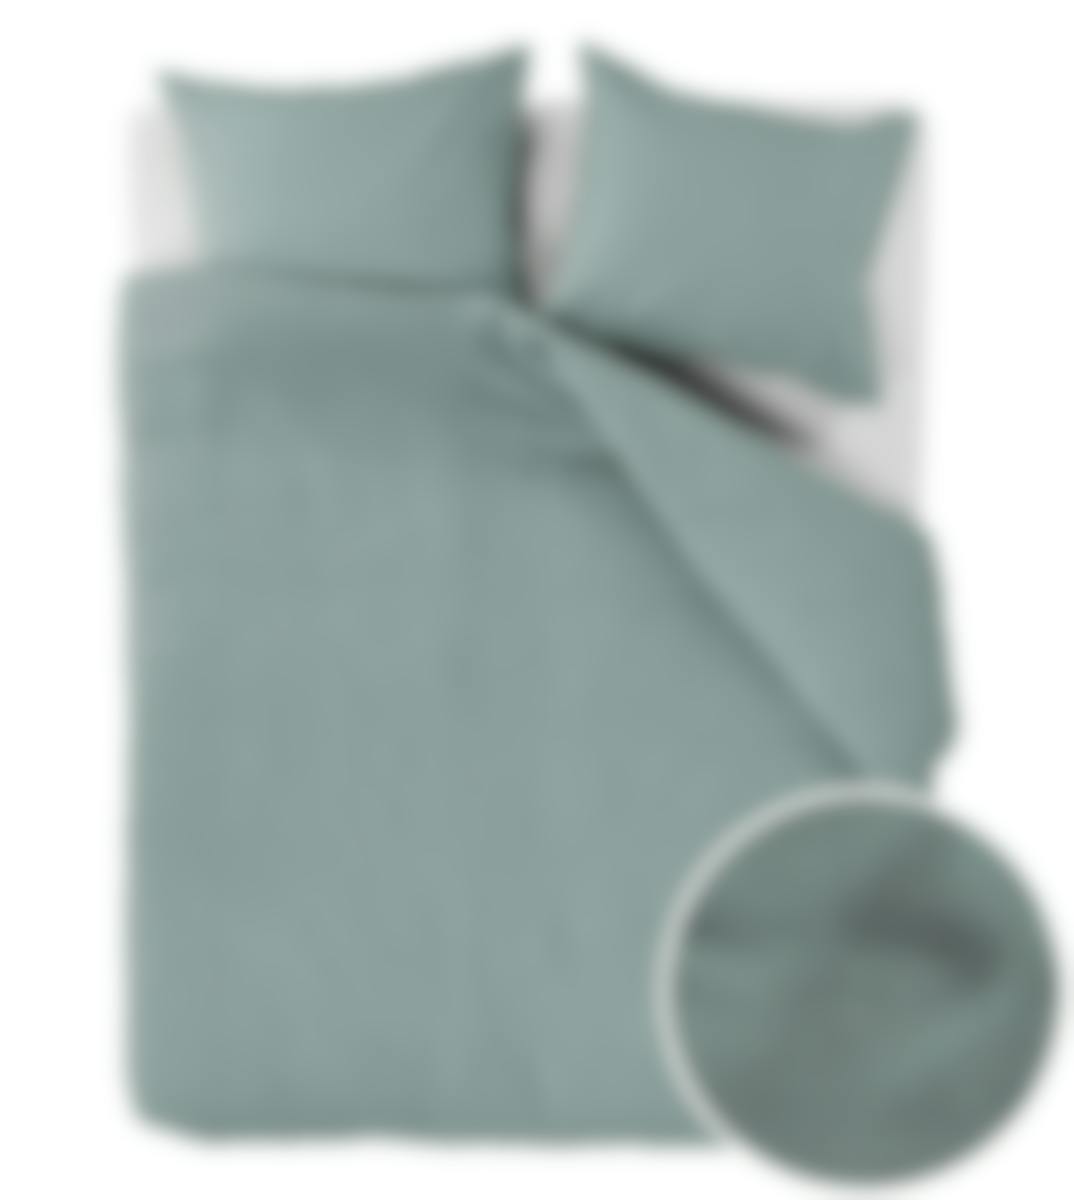 At Home by Beddinghouse housse de couette Relax Grey Green Waffle